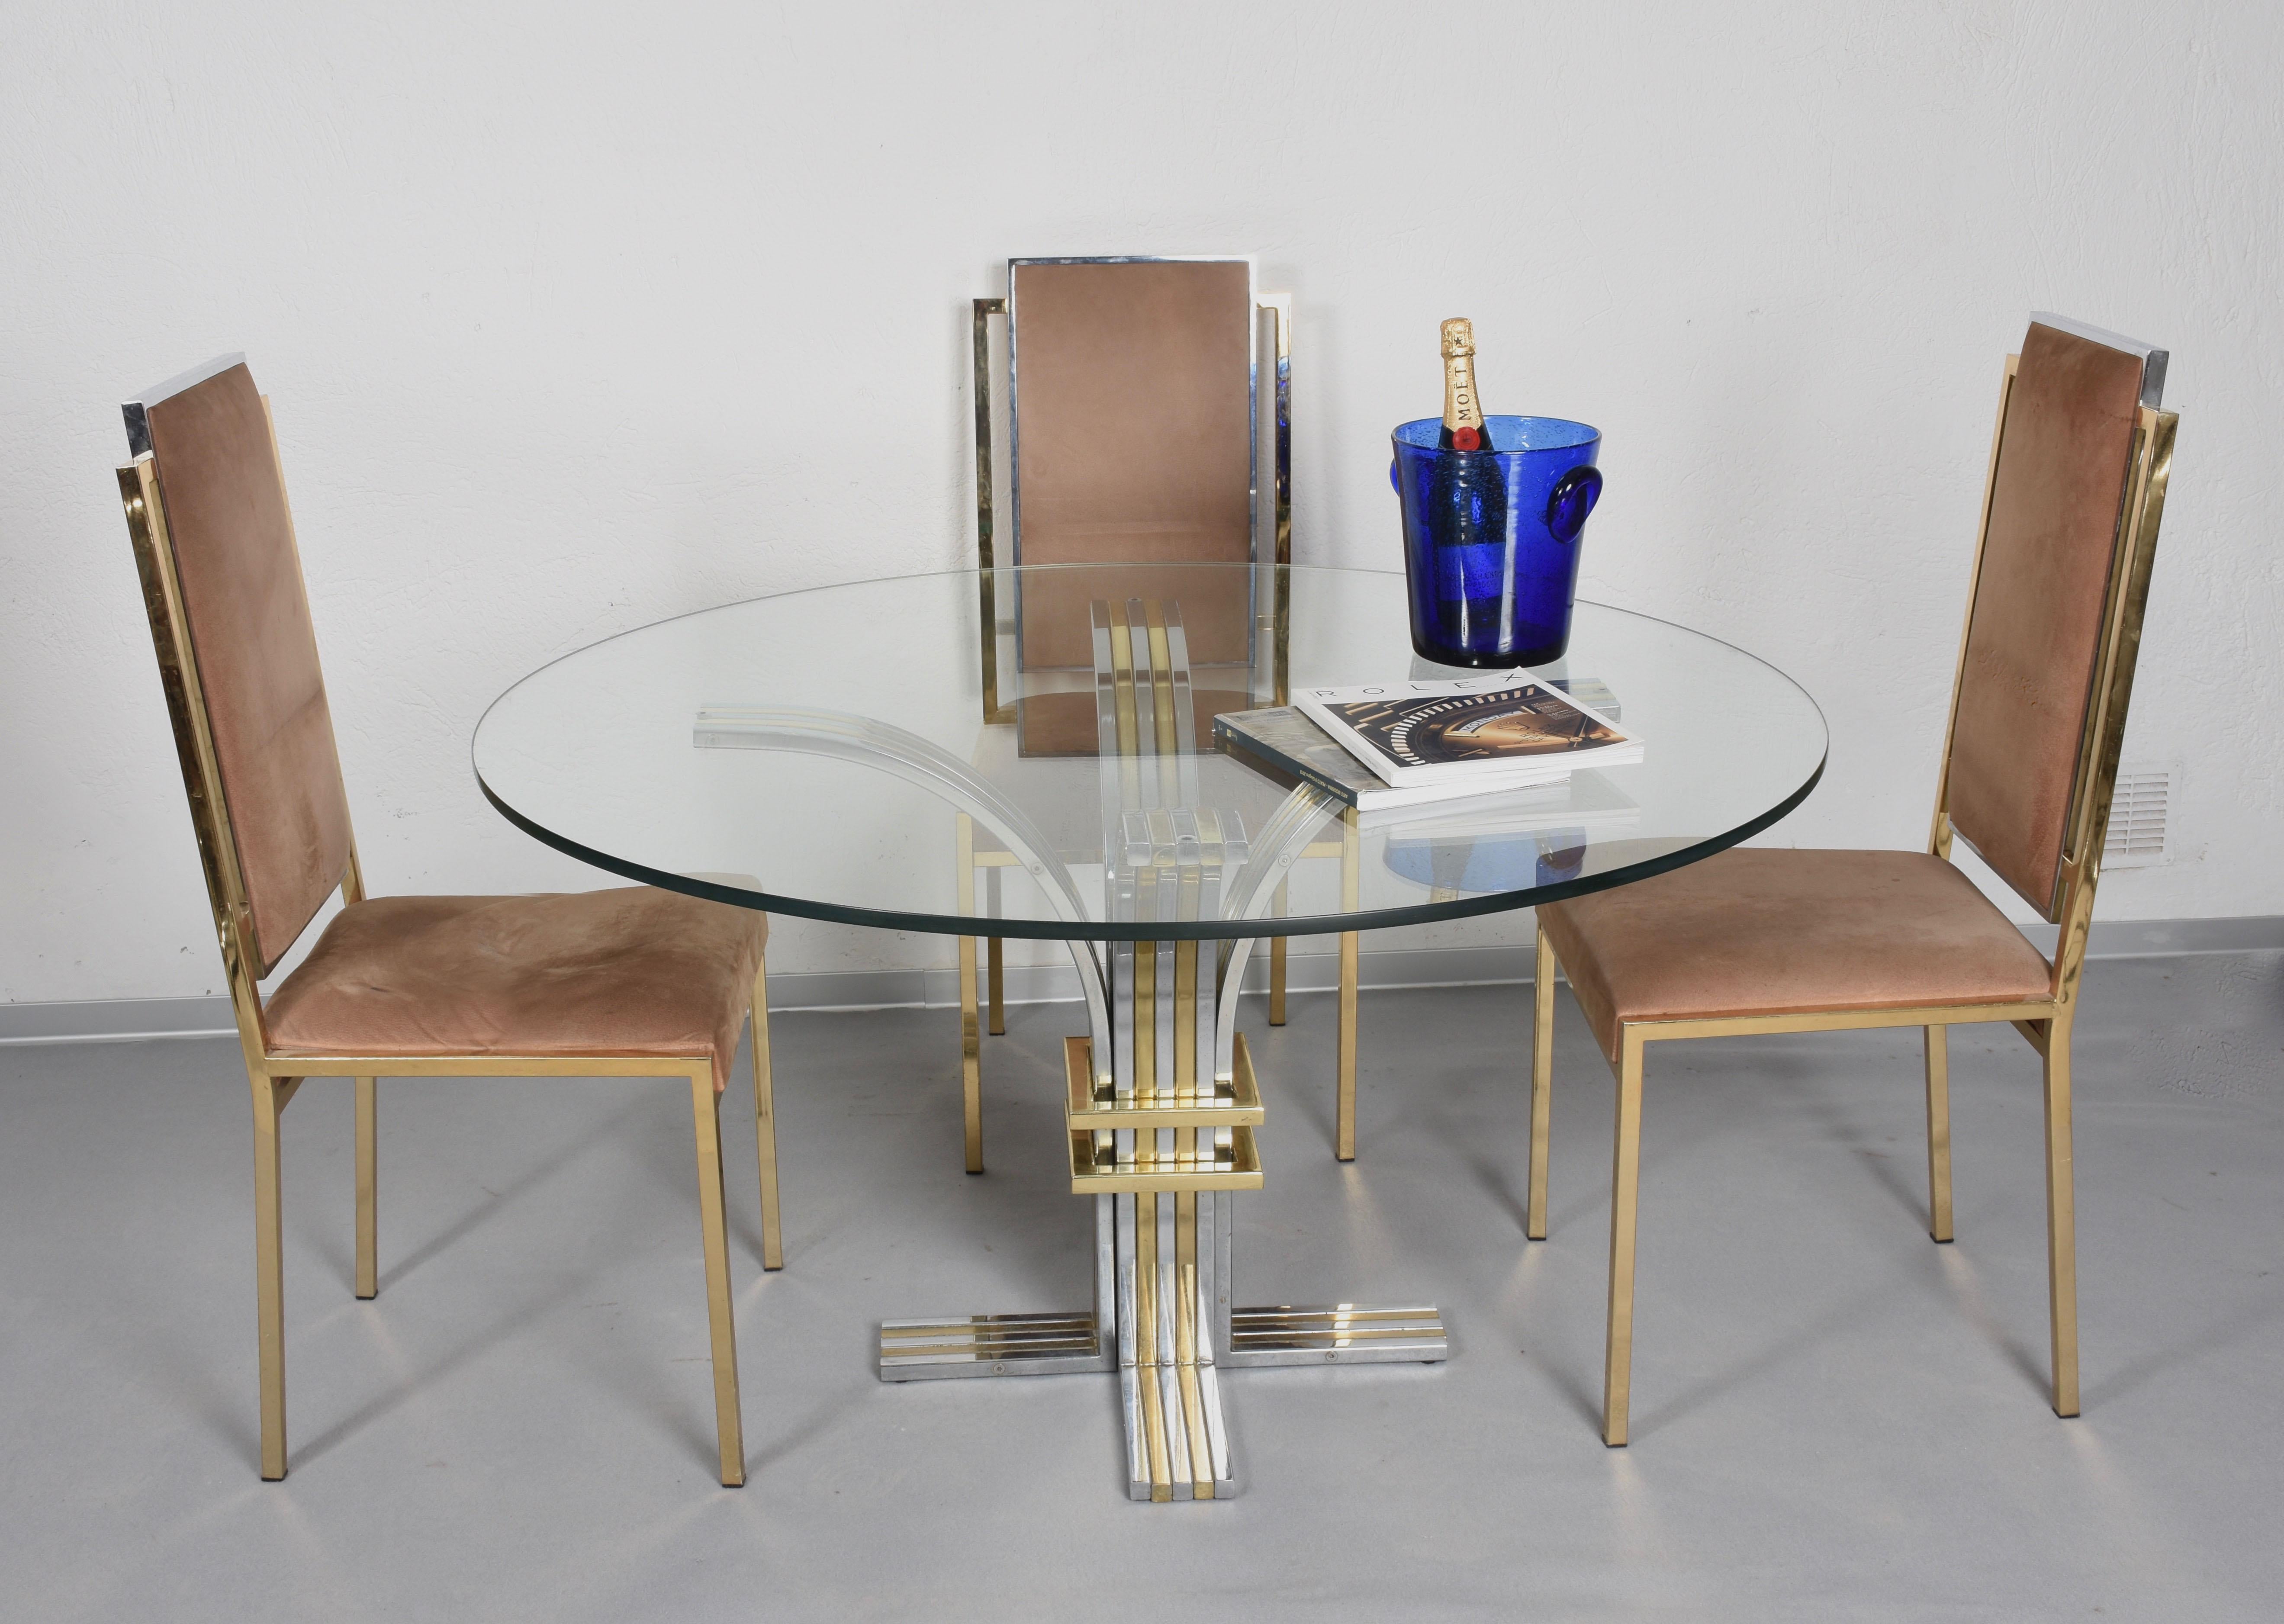 Late 20th Century Brass and Chrome Steel Round Glass Italian Dining Table by Banci Firenze 1970s